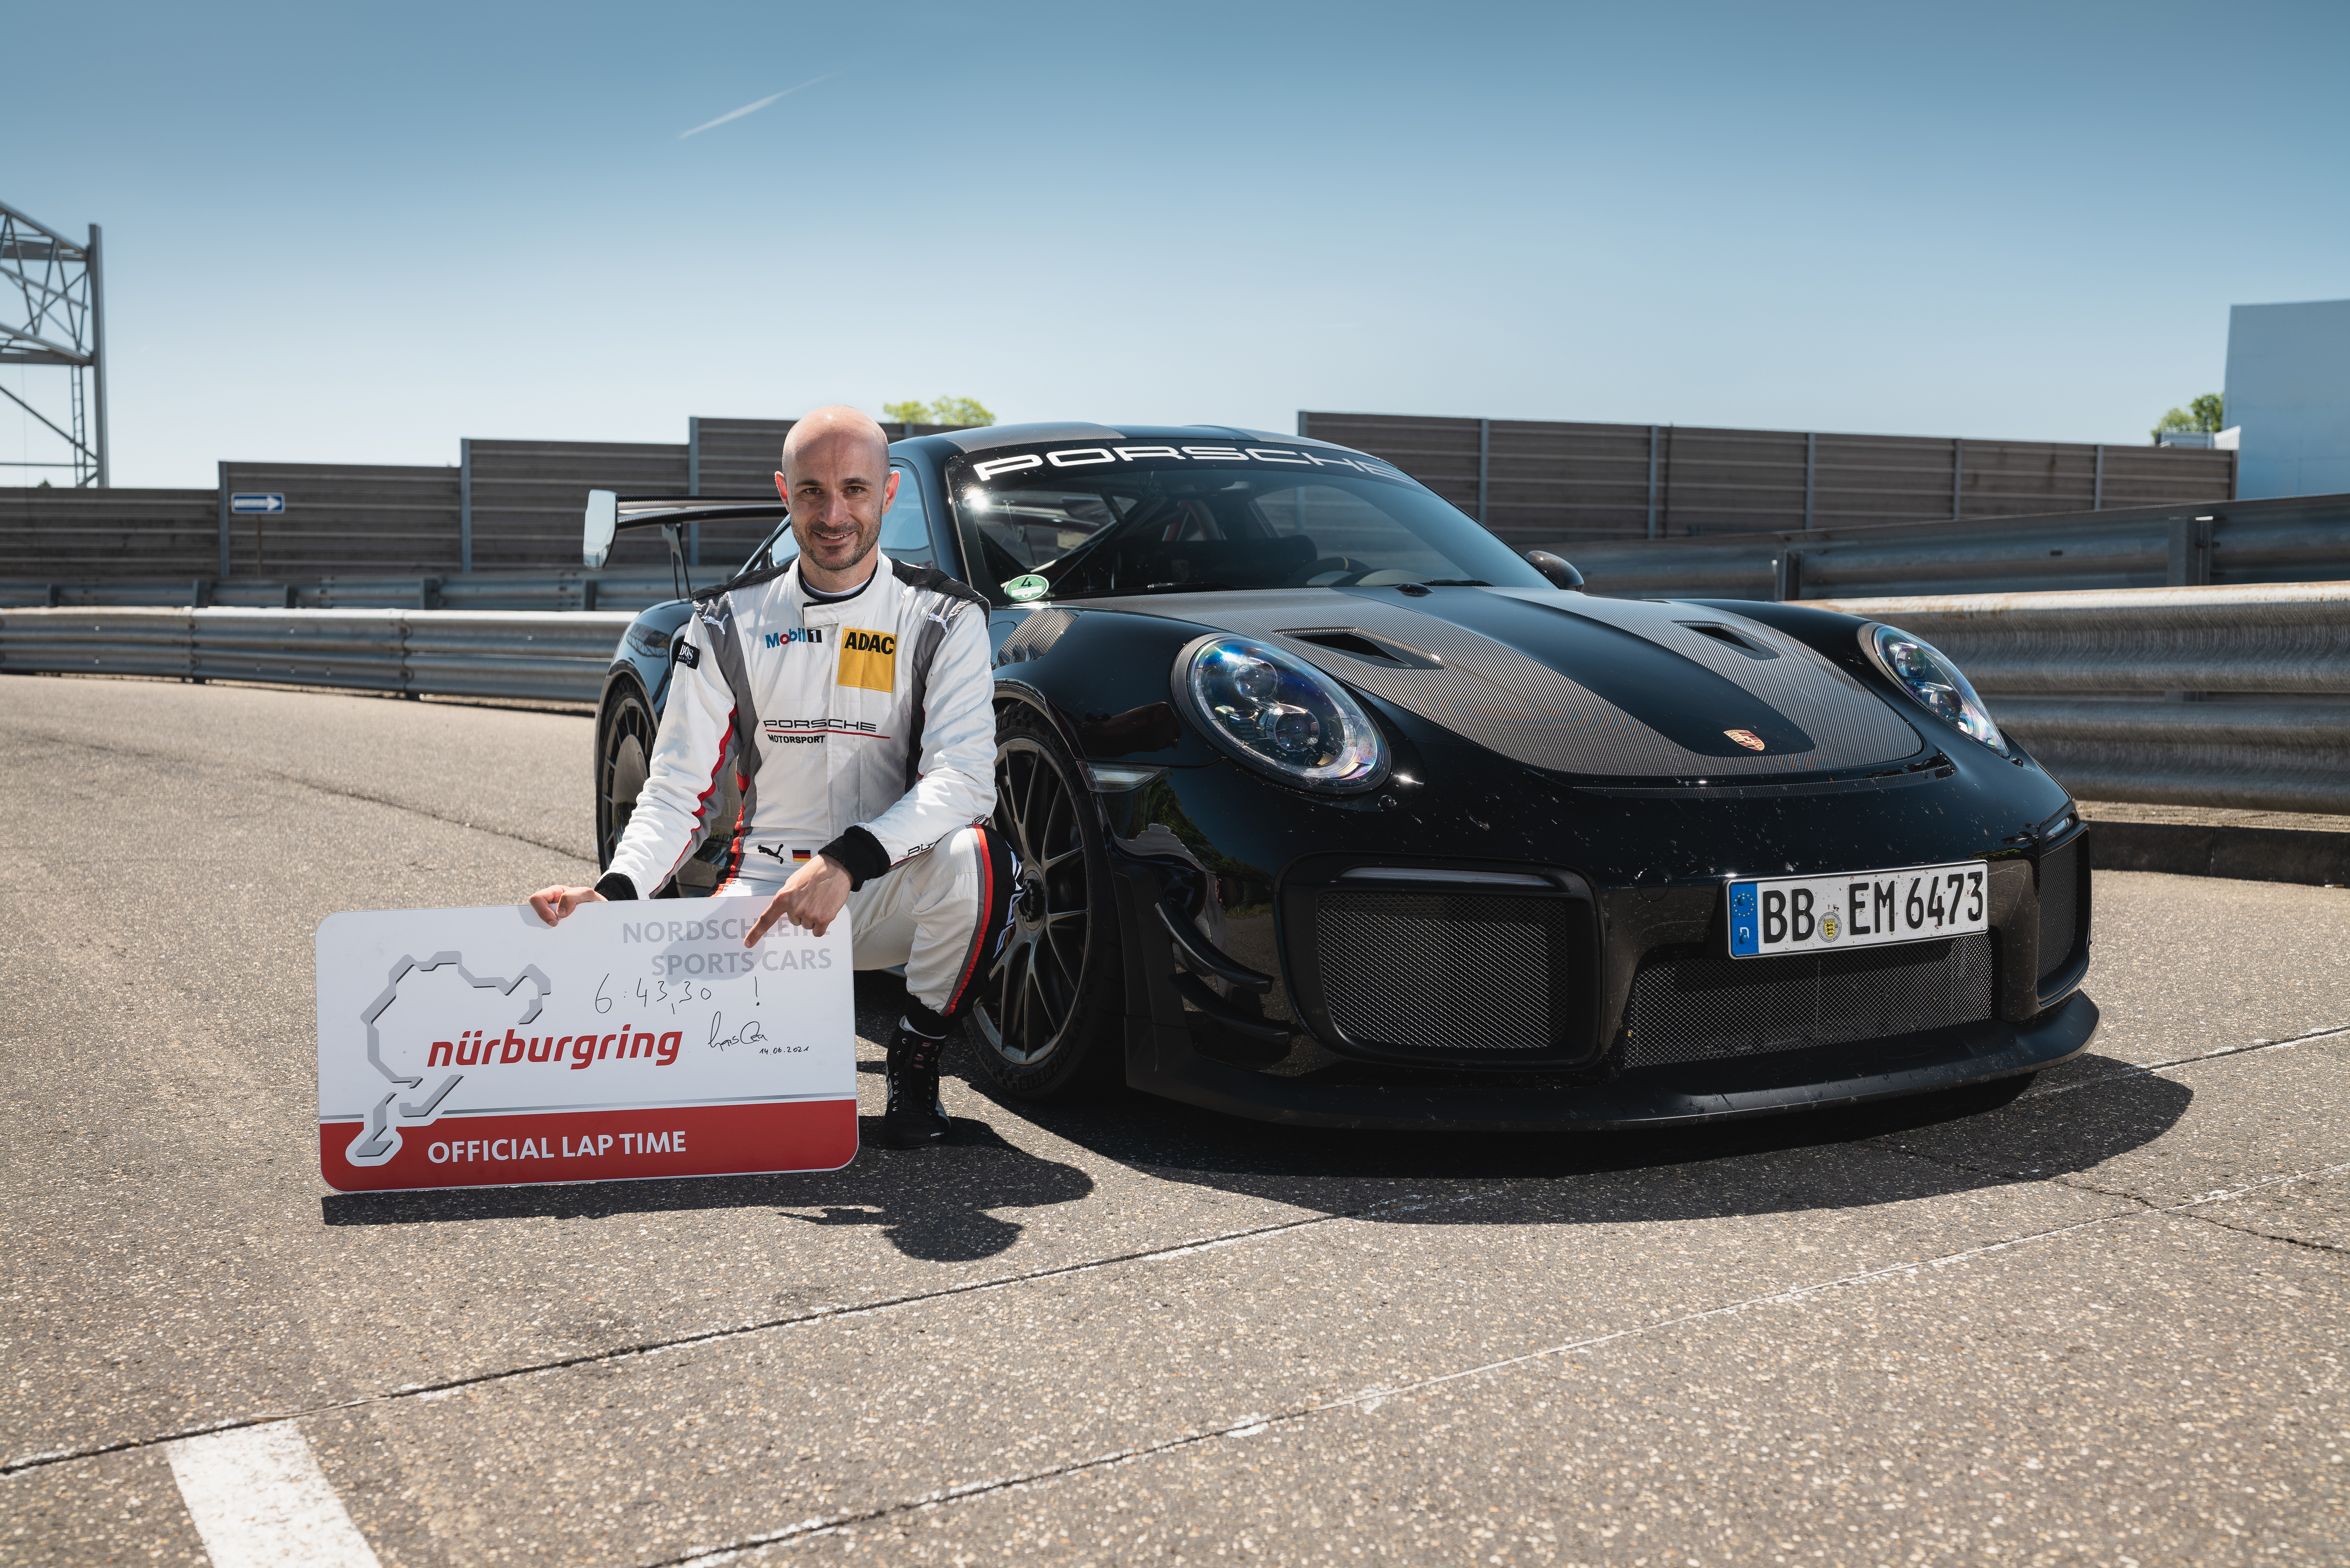 Race driver with Porsche 911 GT2 RS static on track